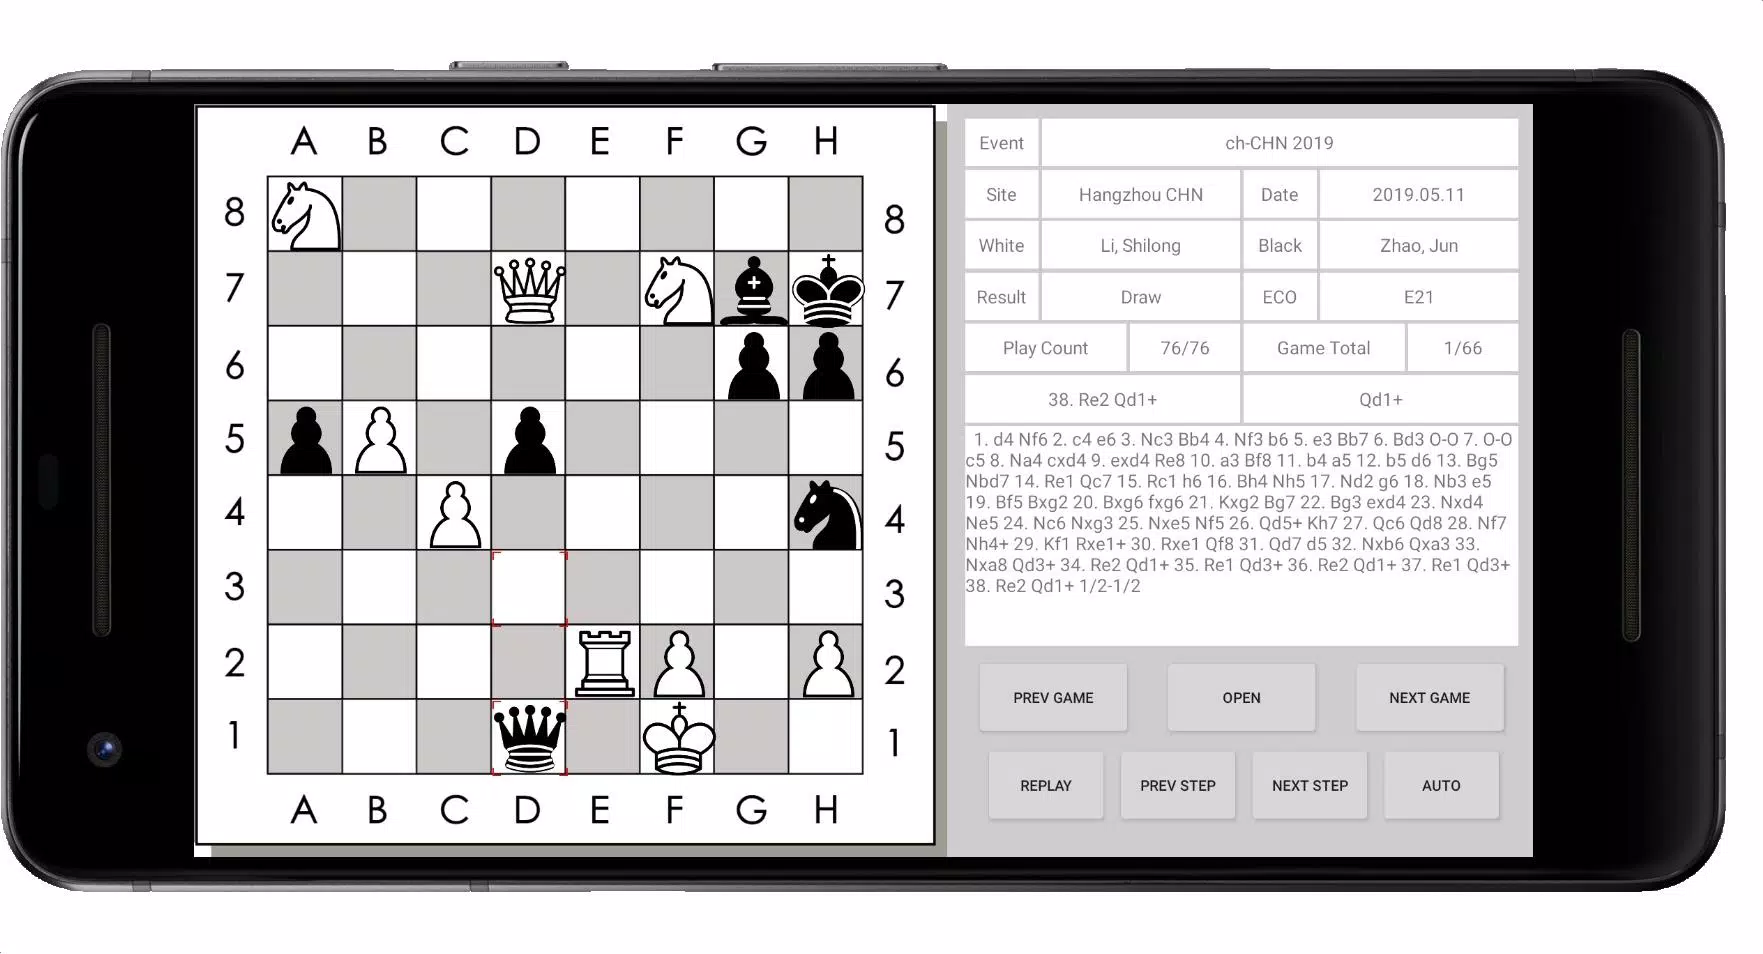 Analyze your Chess - PGN Viewer Apk Download for Android- Latest version  2.0.4- com.lucian.musca.chess.analyzeyourchess